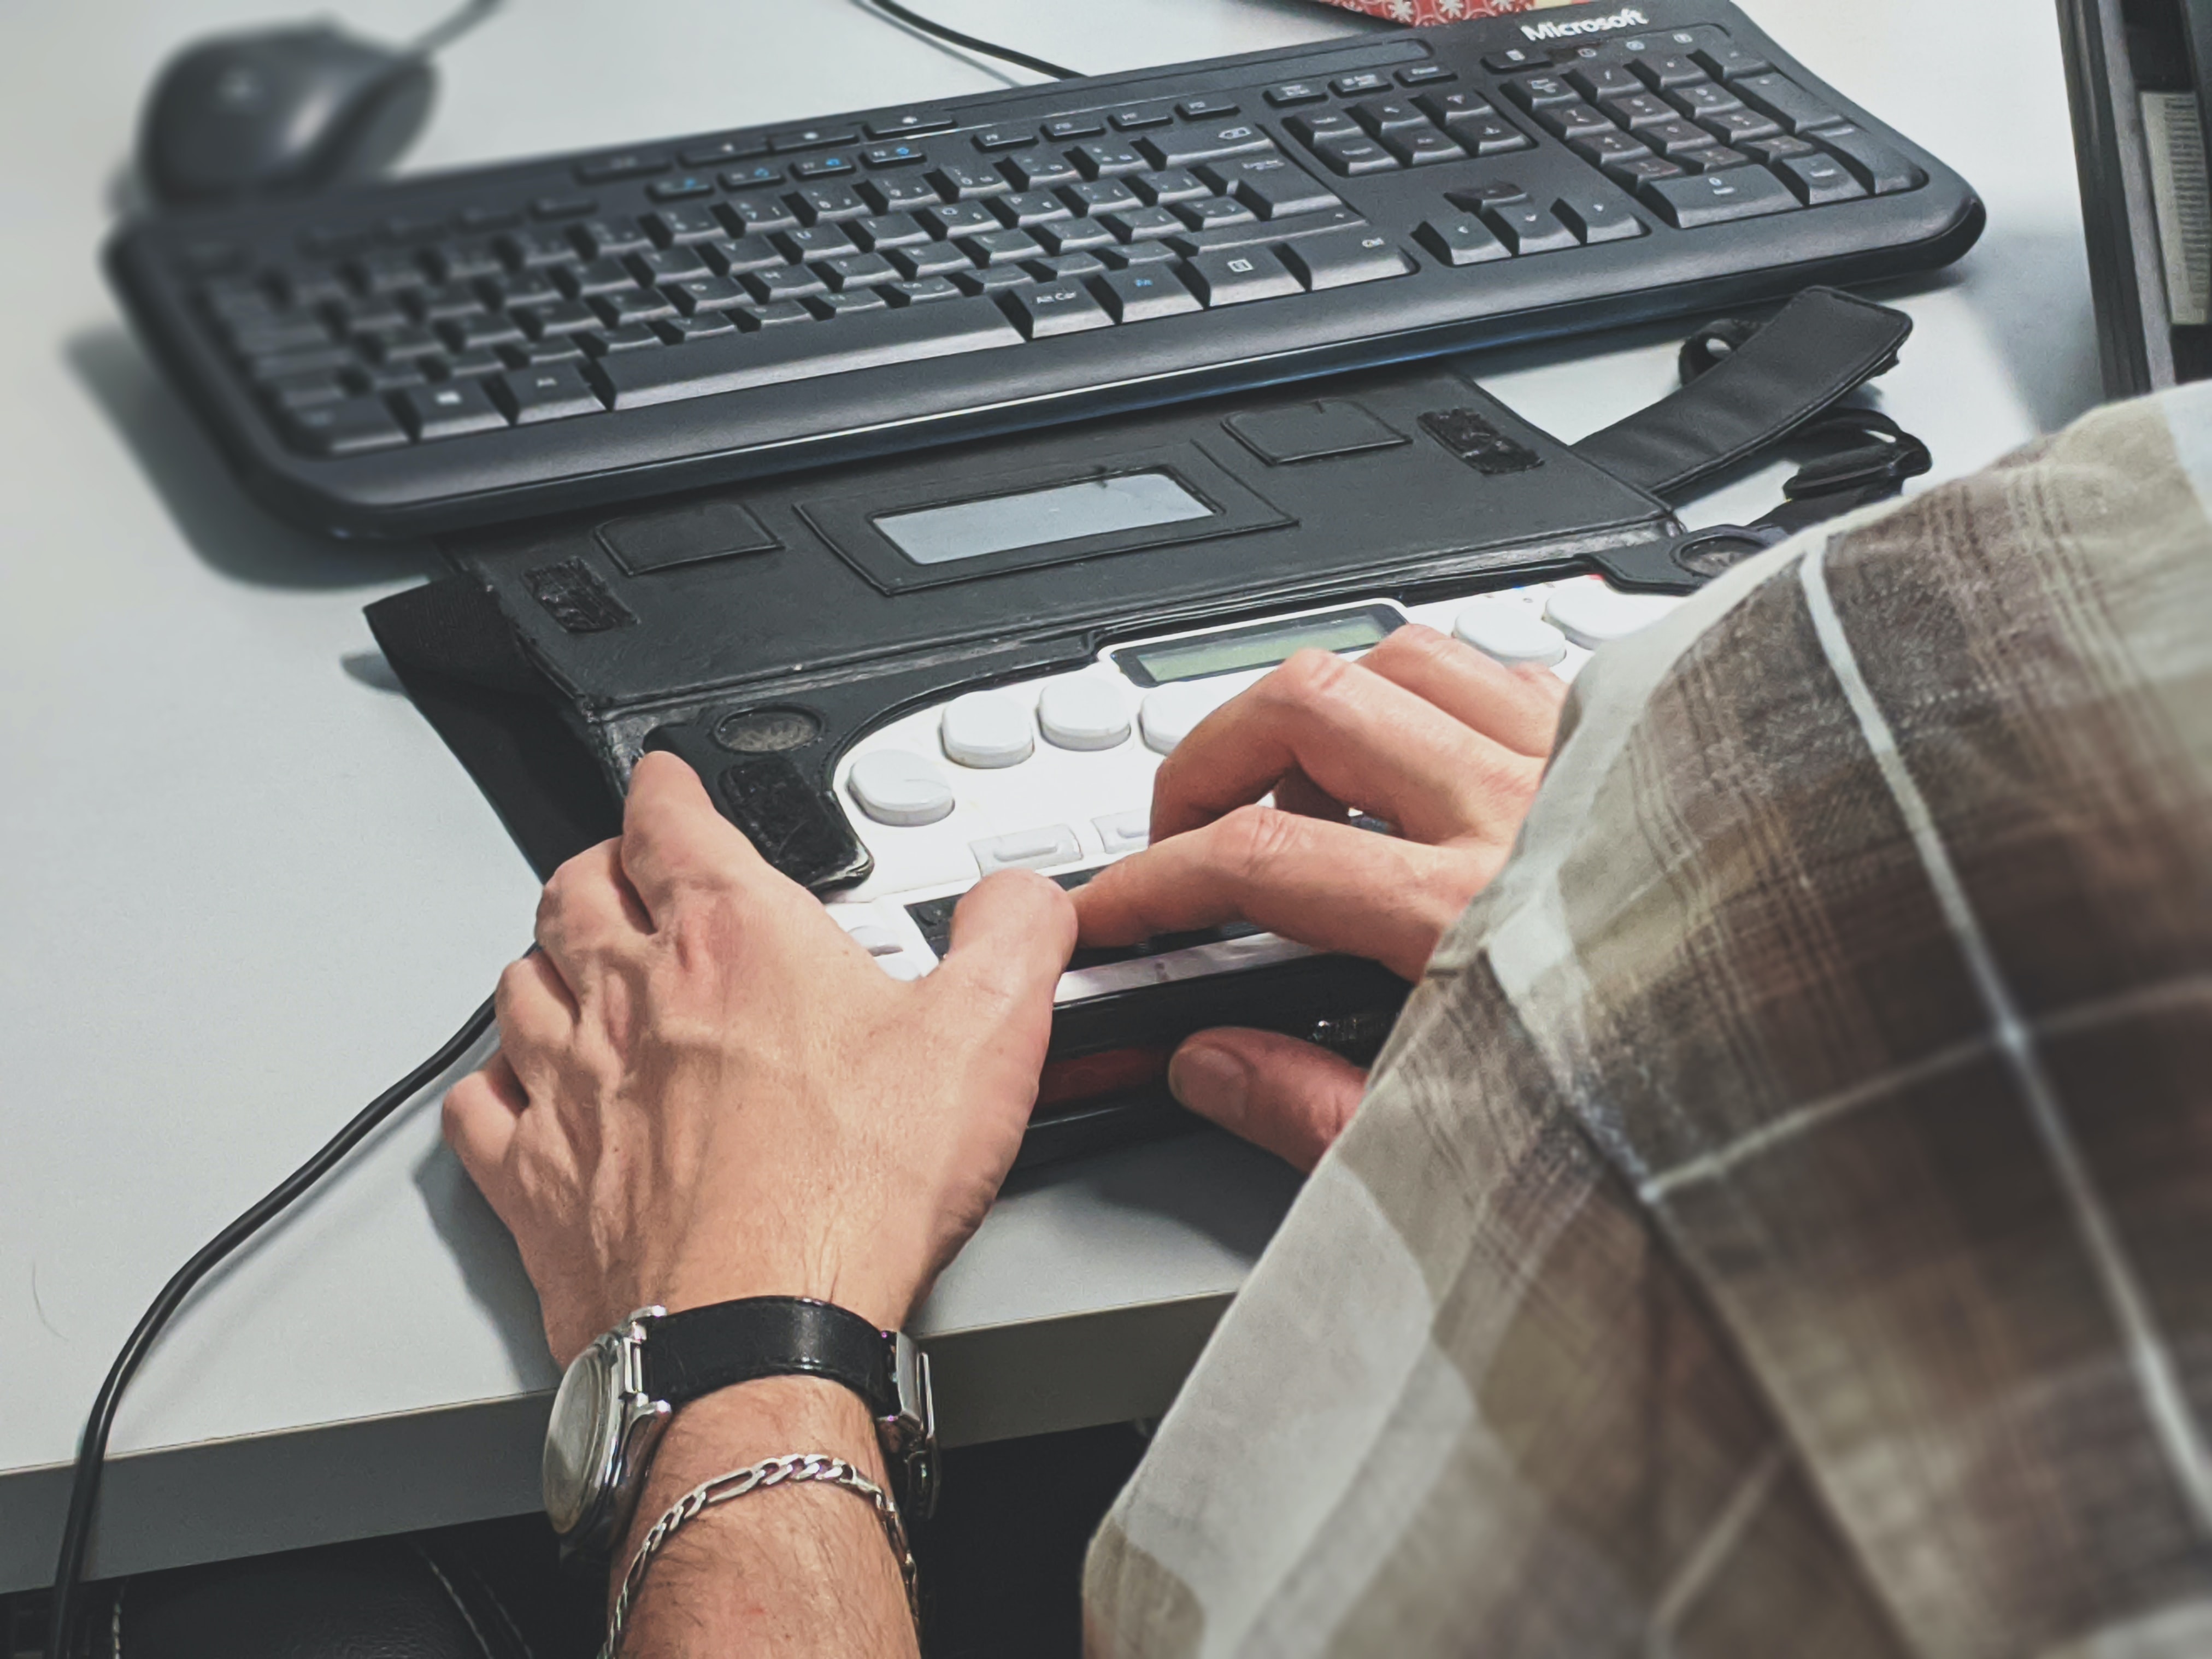 Photo of a person using a braille reader device on a desk by Sigmund from Unsplash